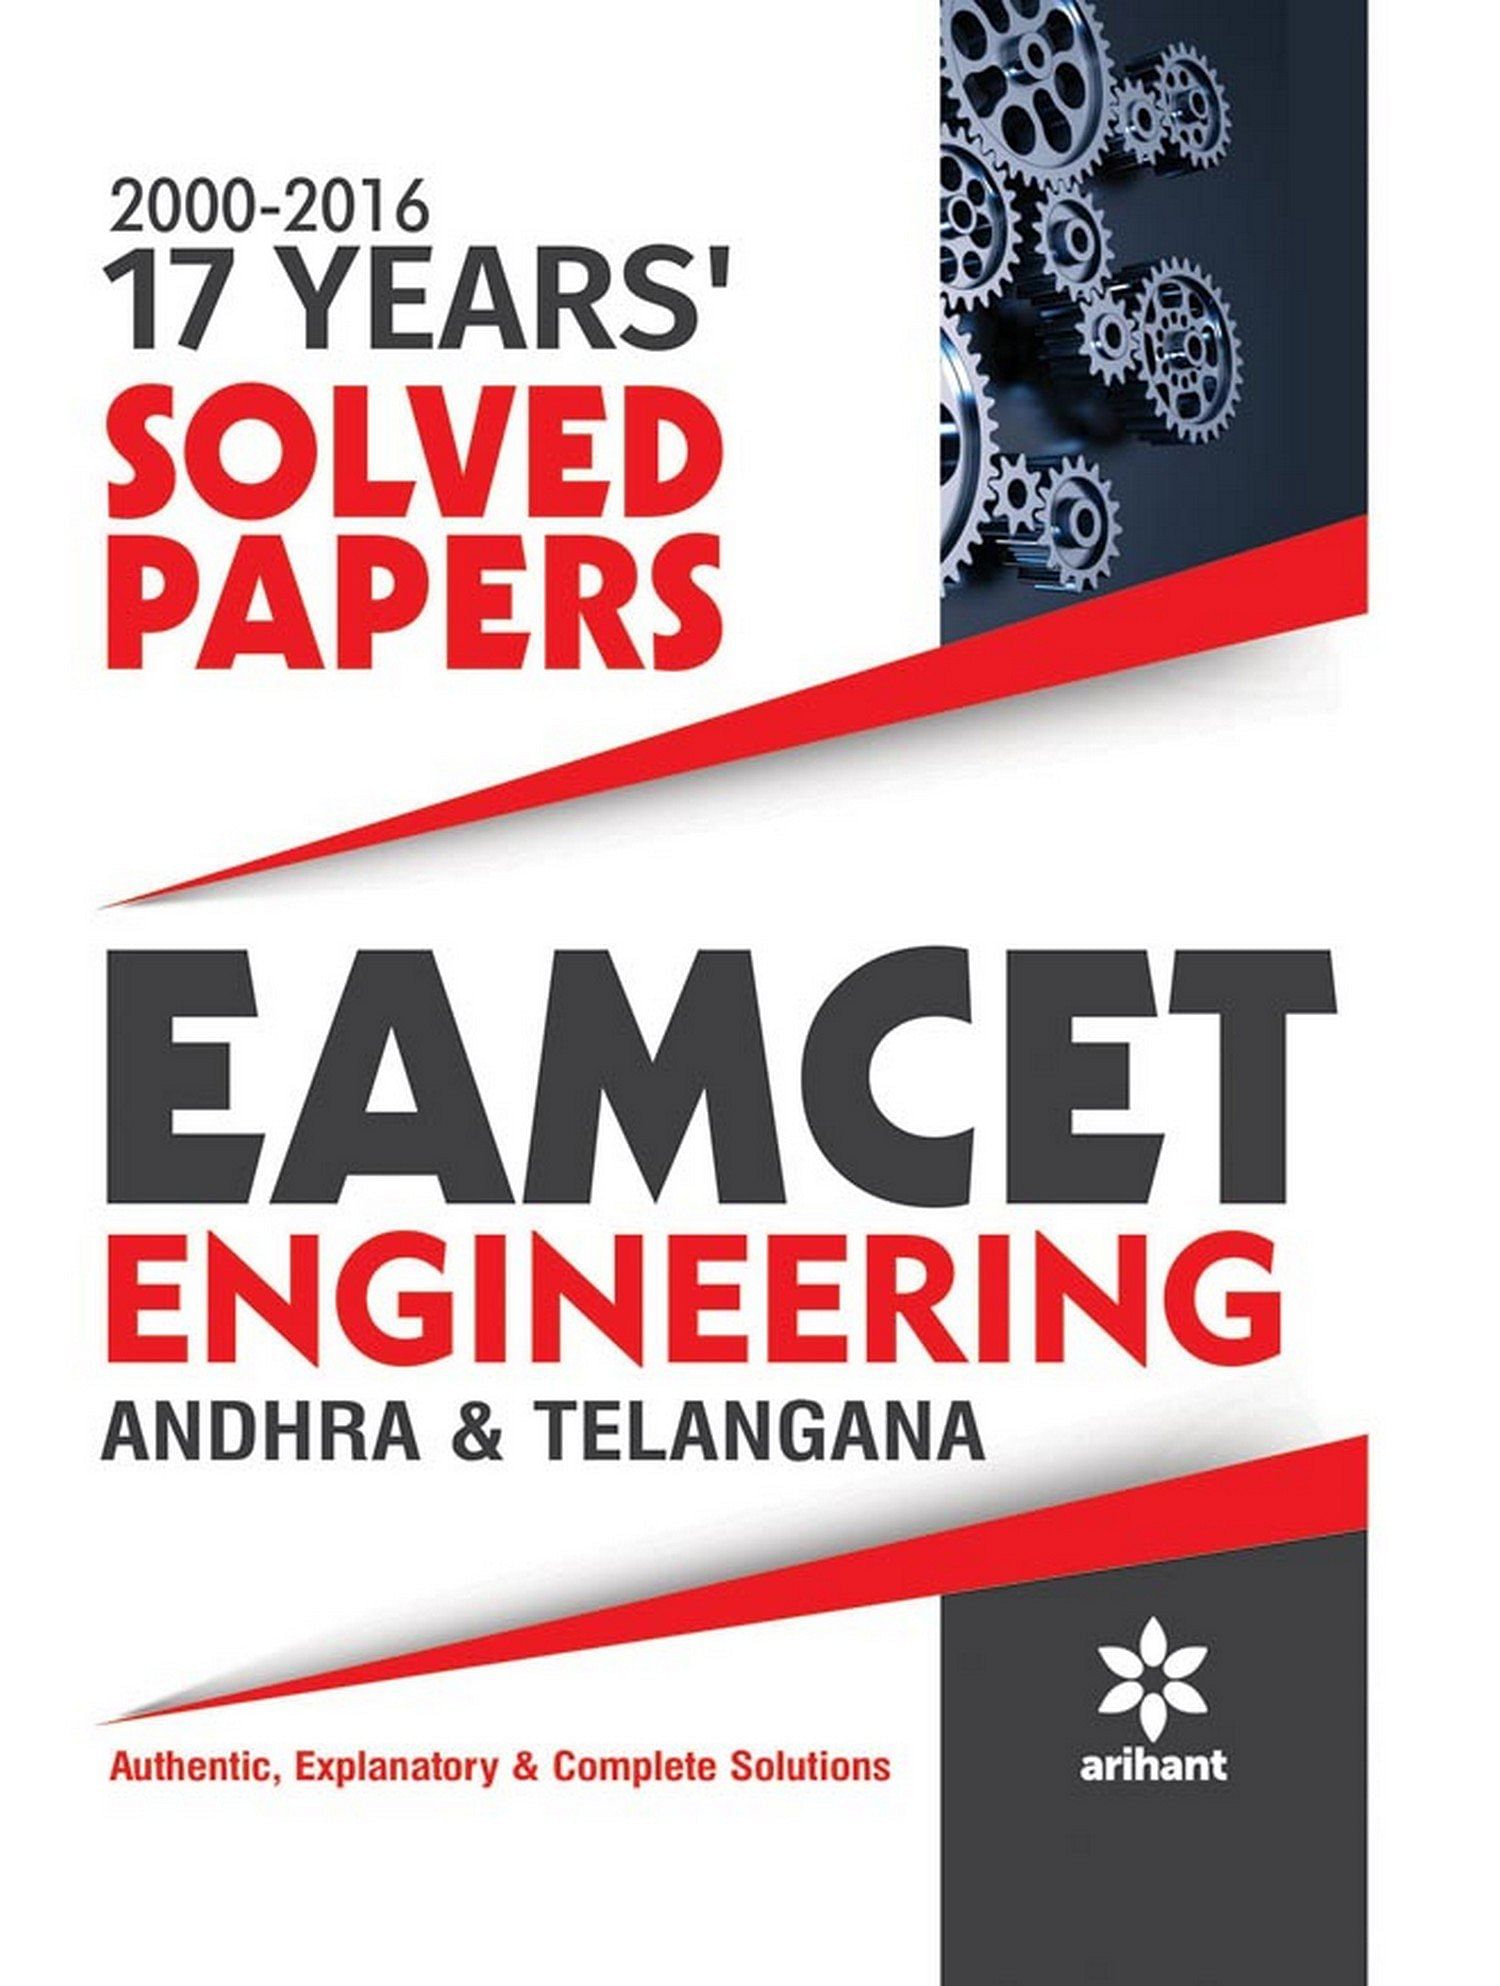 17 Years Solved Papers Of EAMCET (Engg.)